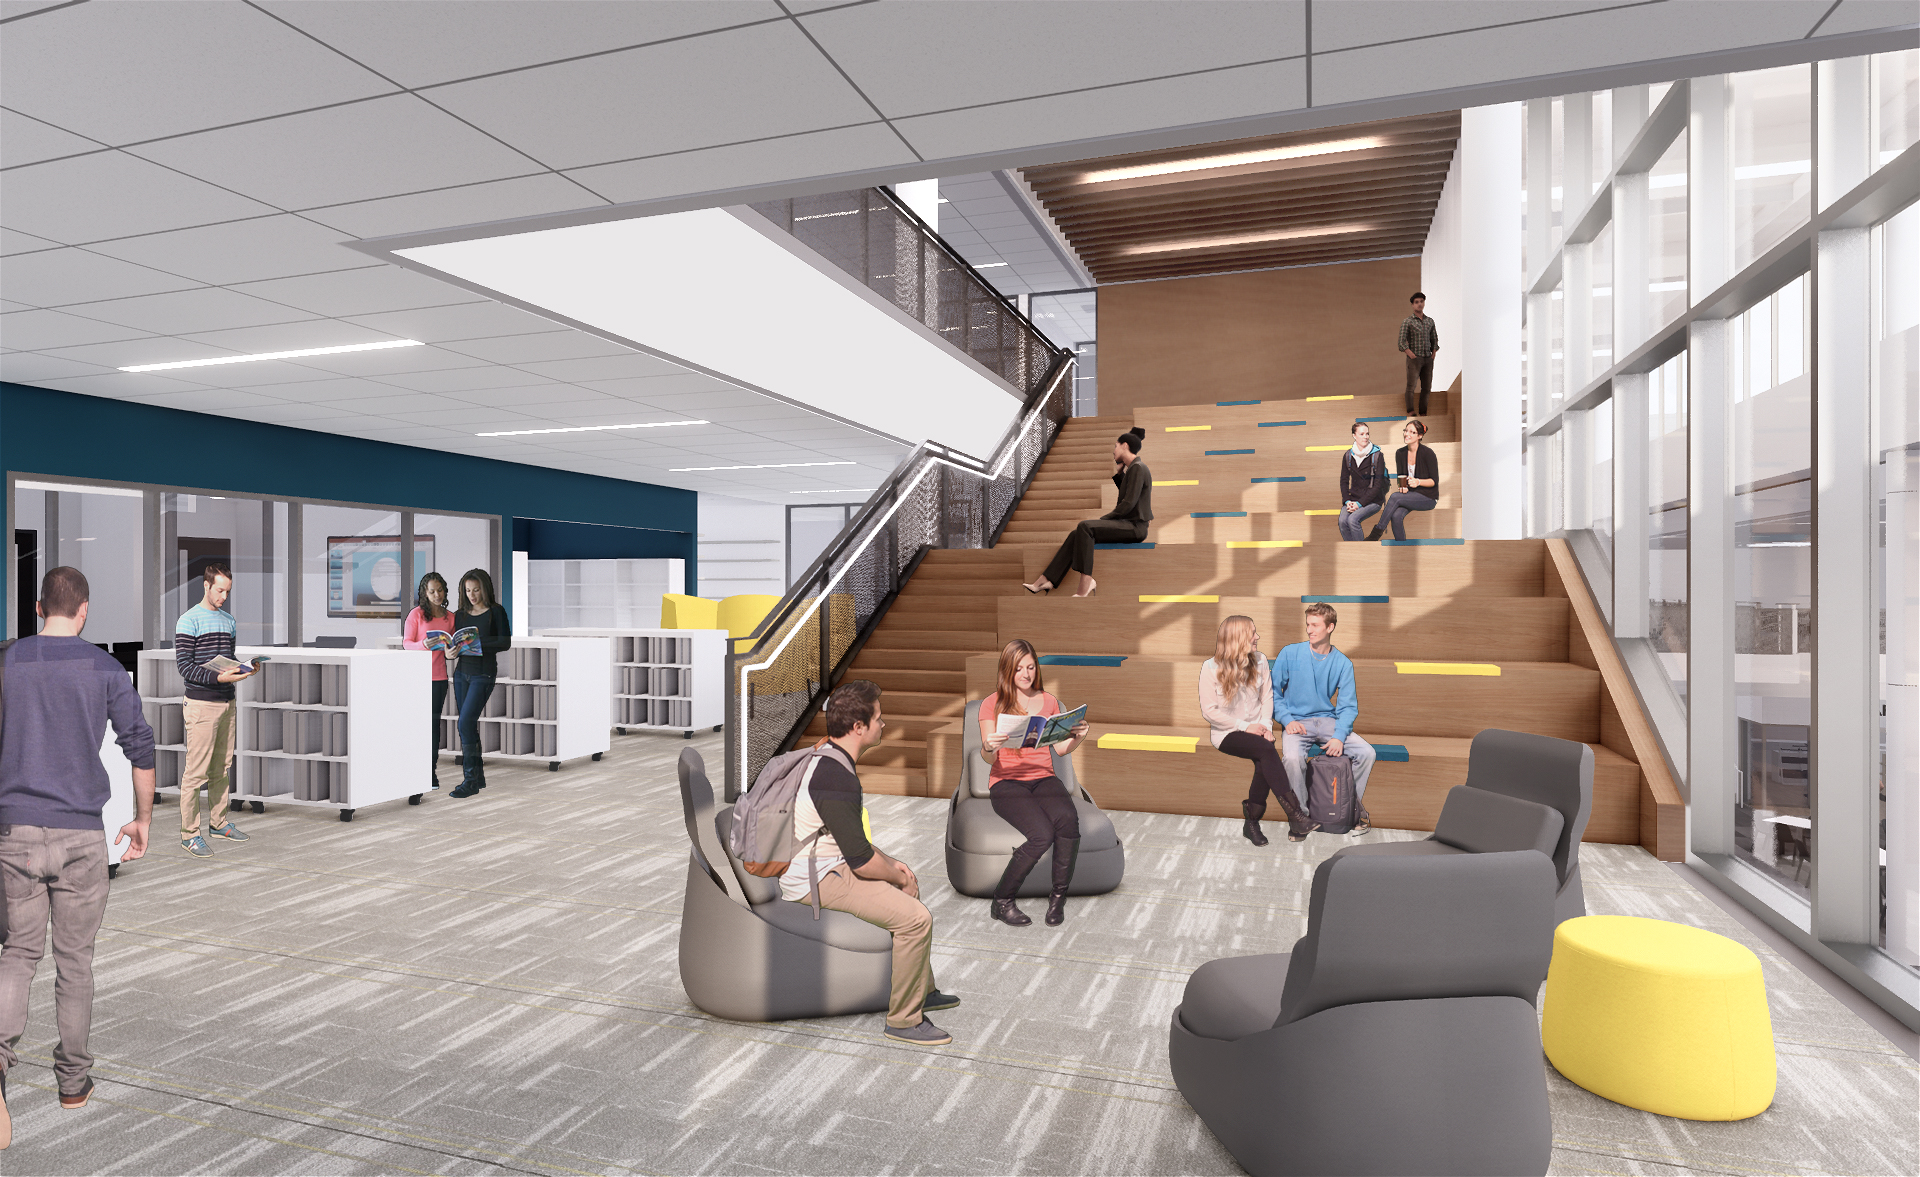 A rendering of the learning center, with stairs going up to an additional floor, soft seating and bookshelves 